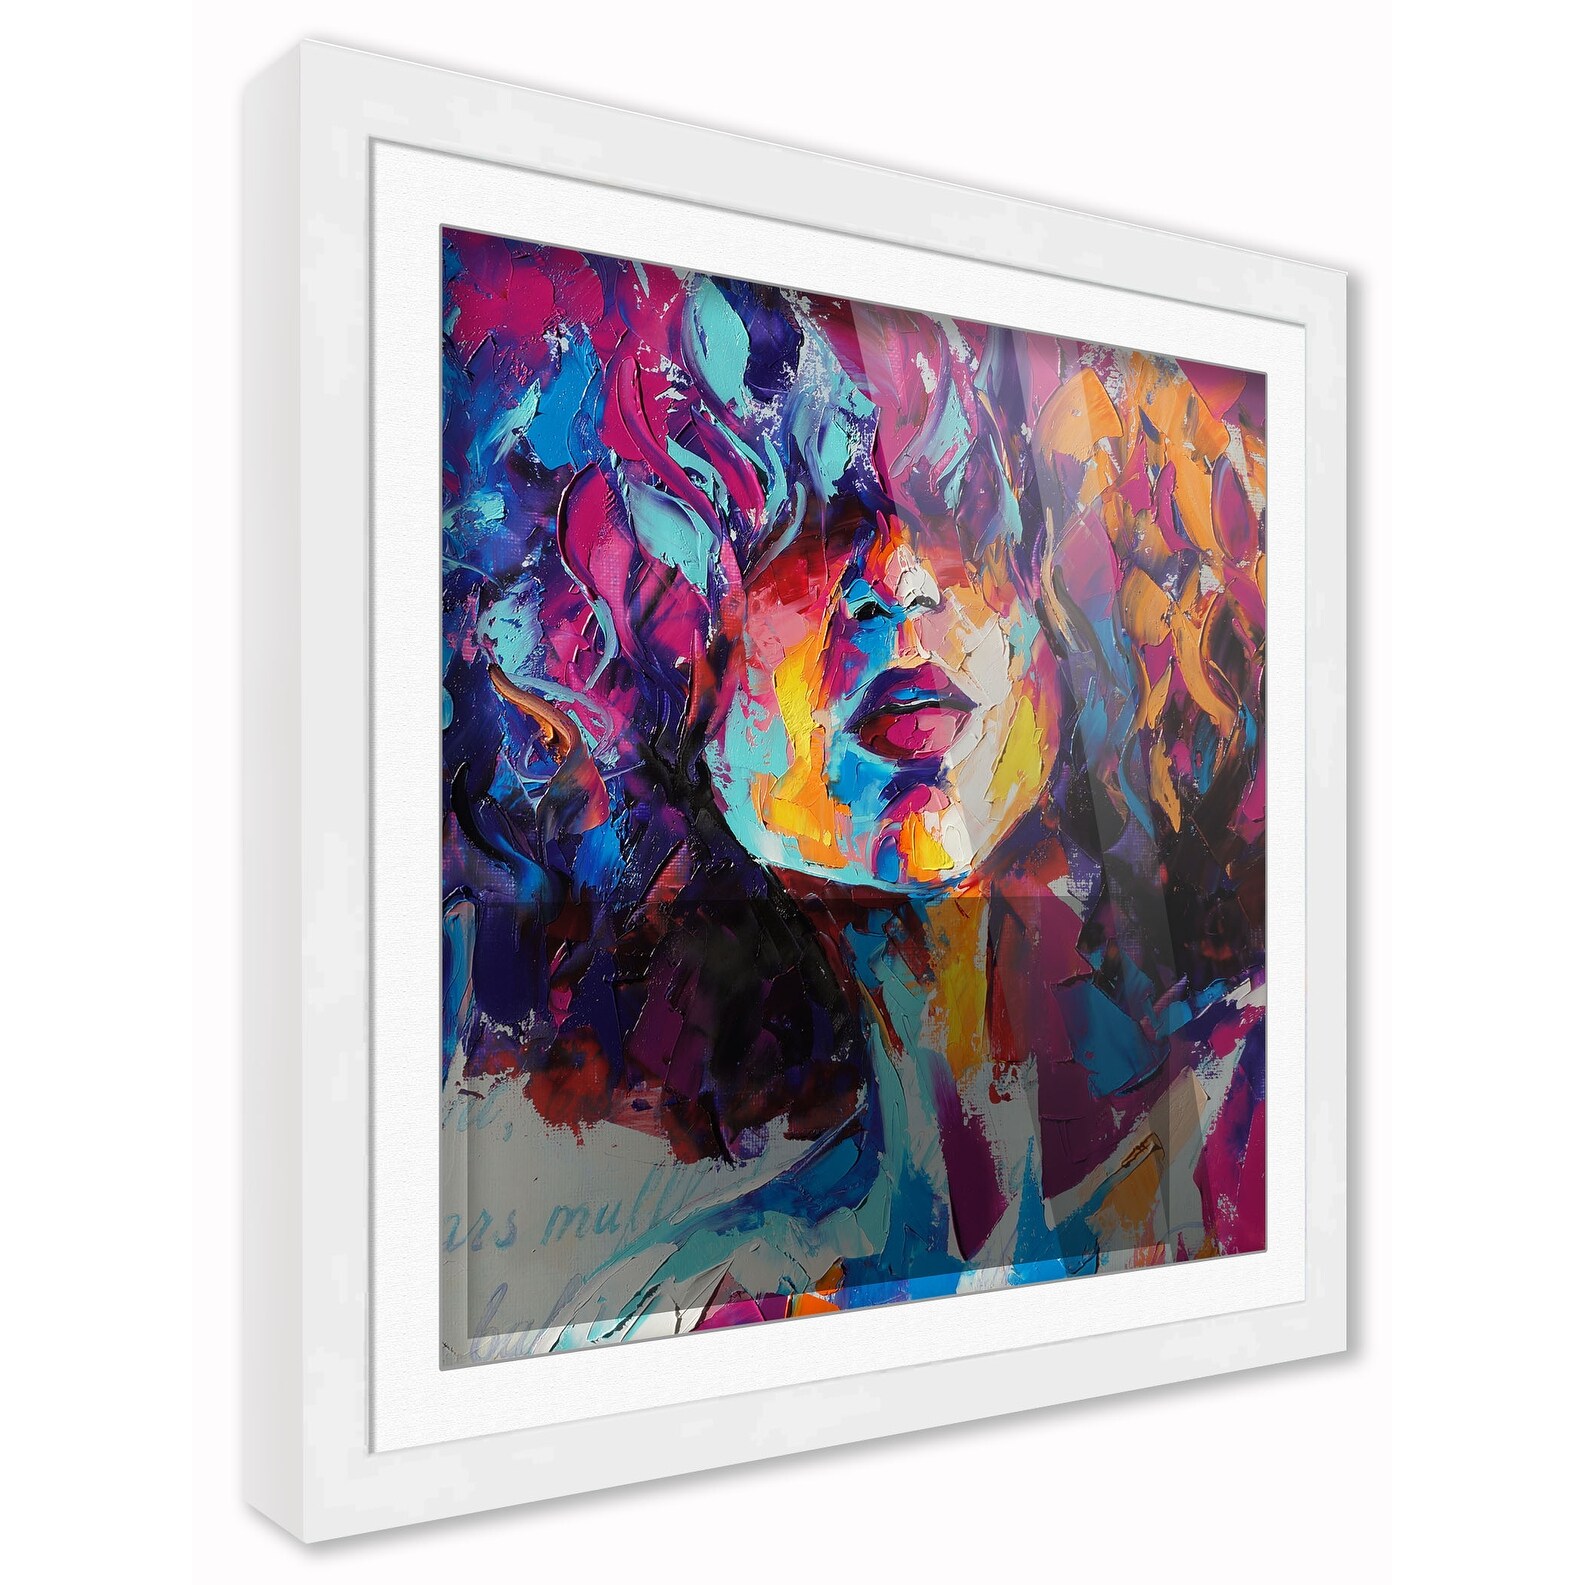 8x8 Frame White Matted for 8x8 Picture or 11x11 Art Poster Without